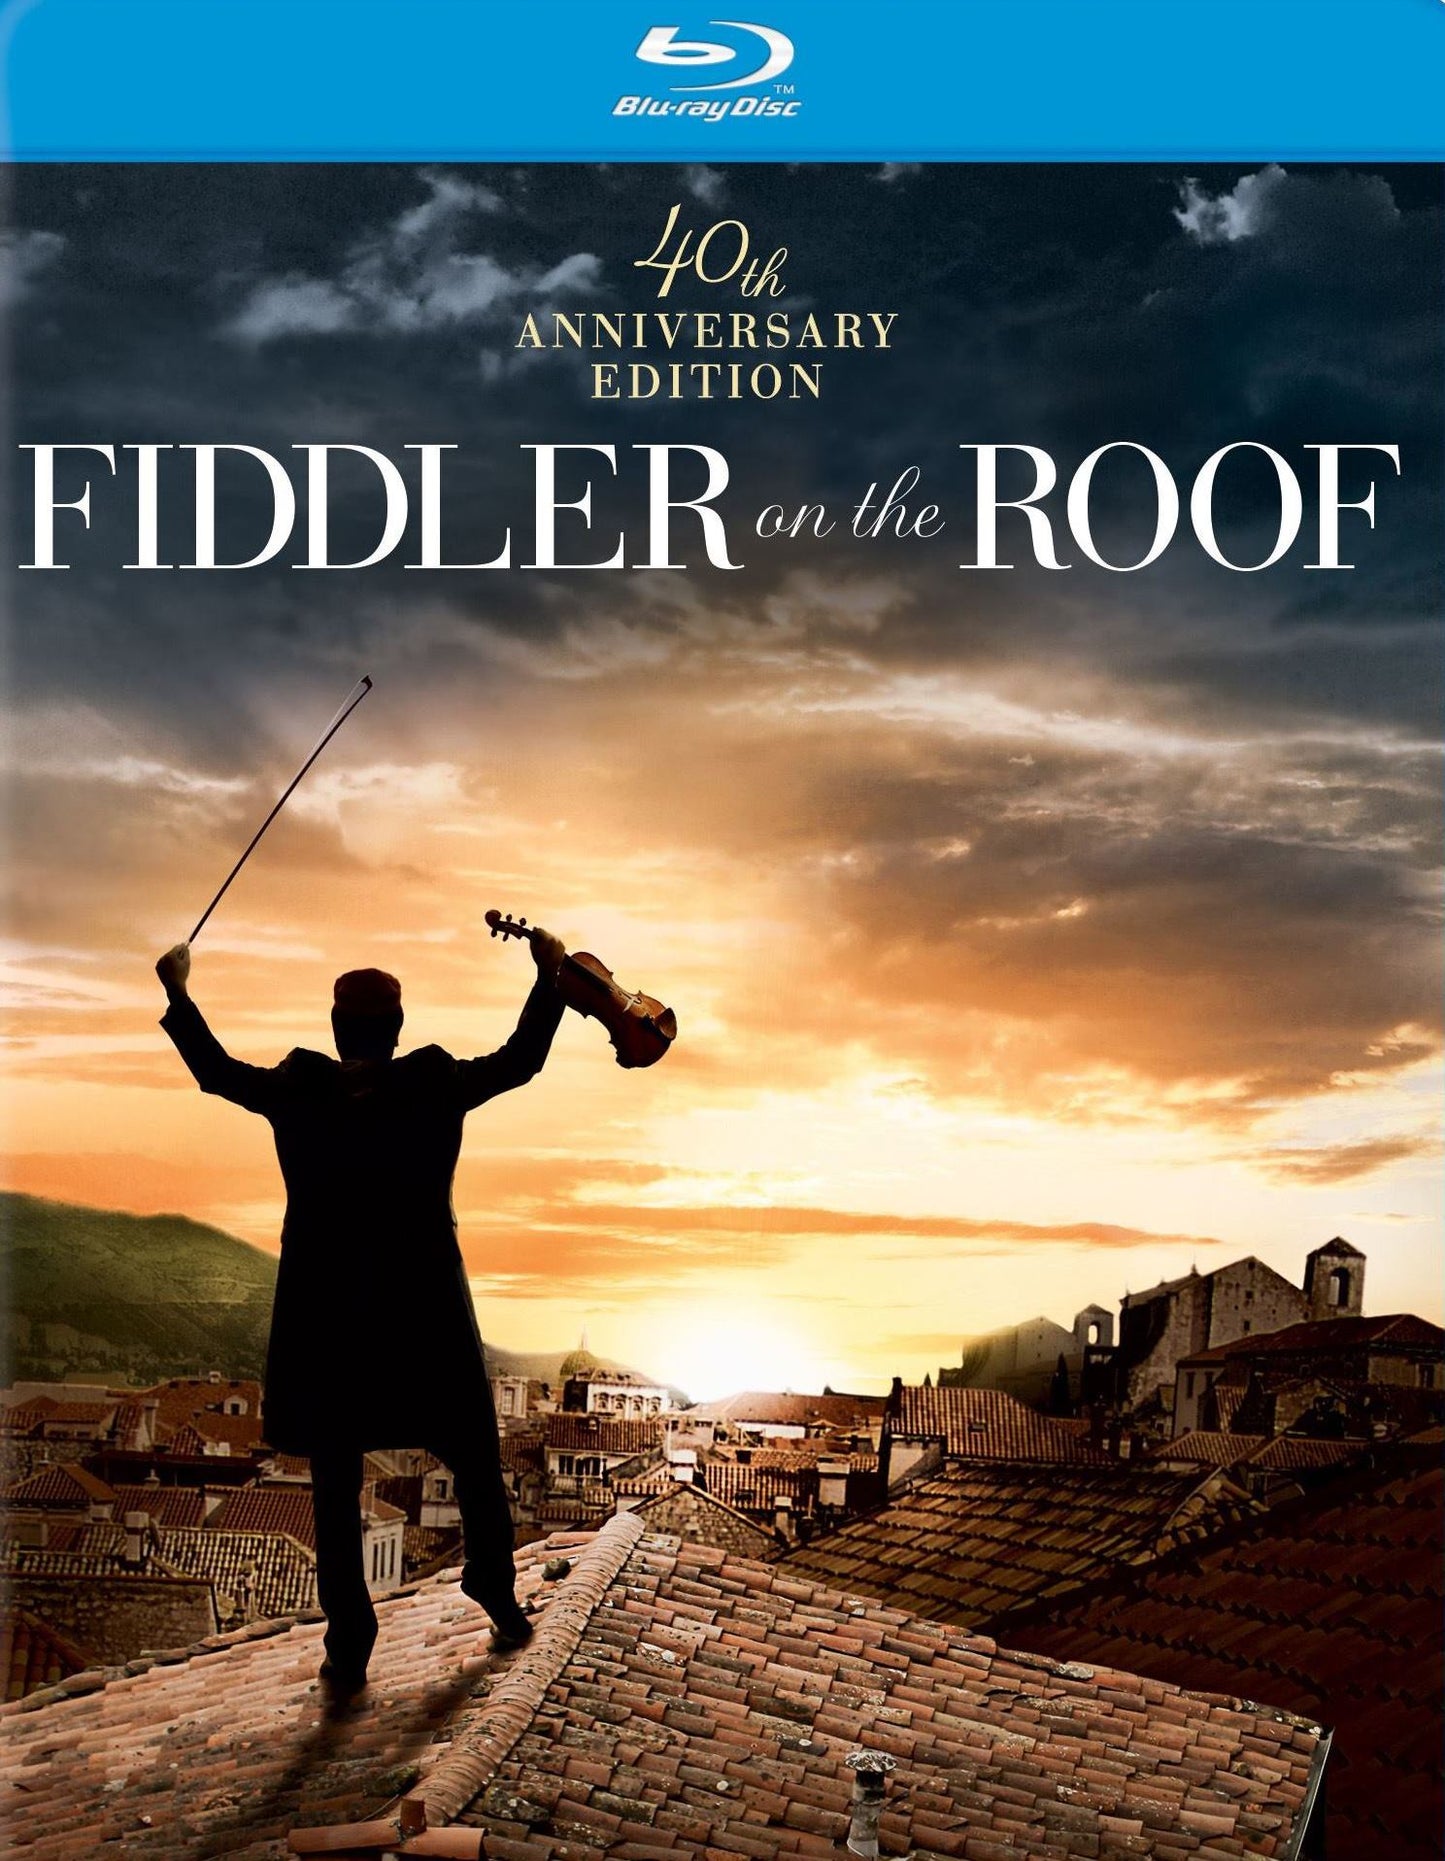 Fiddler on the Roof [Blu-ray] cover art